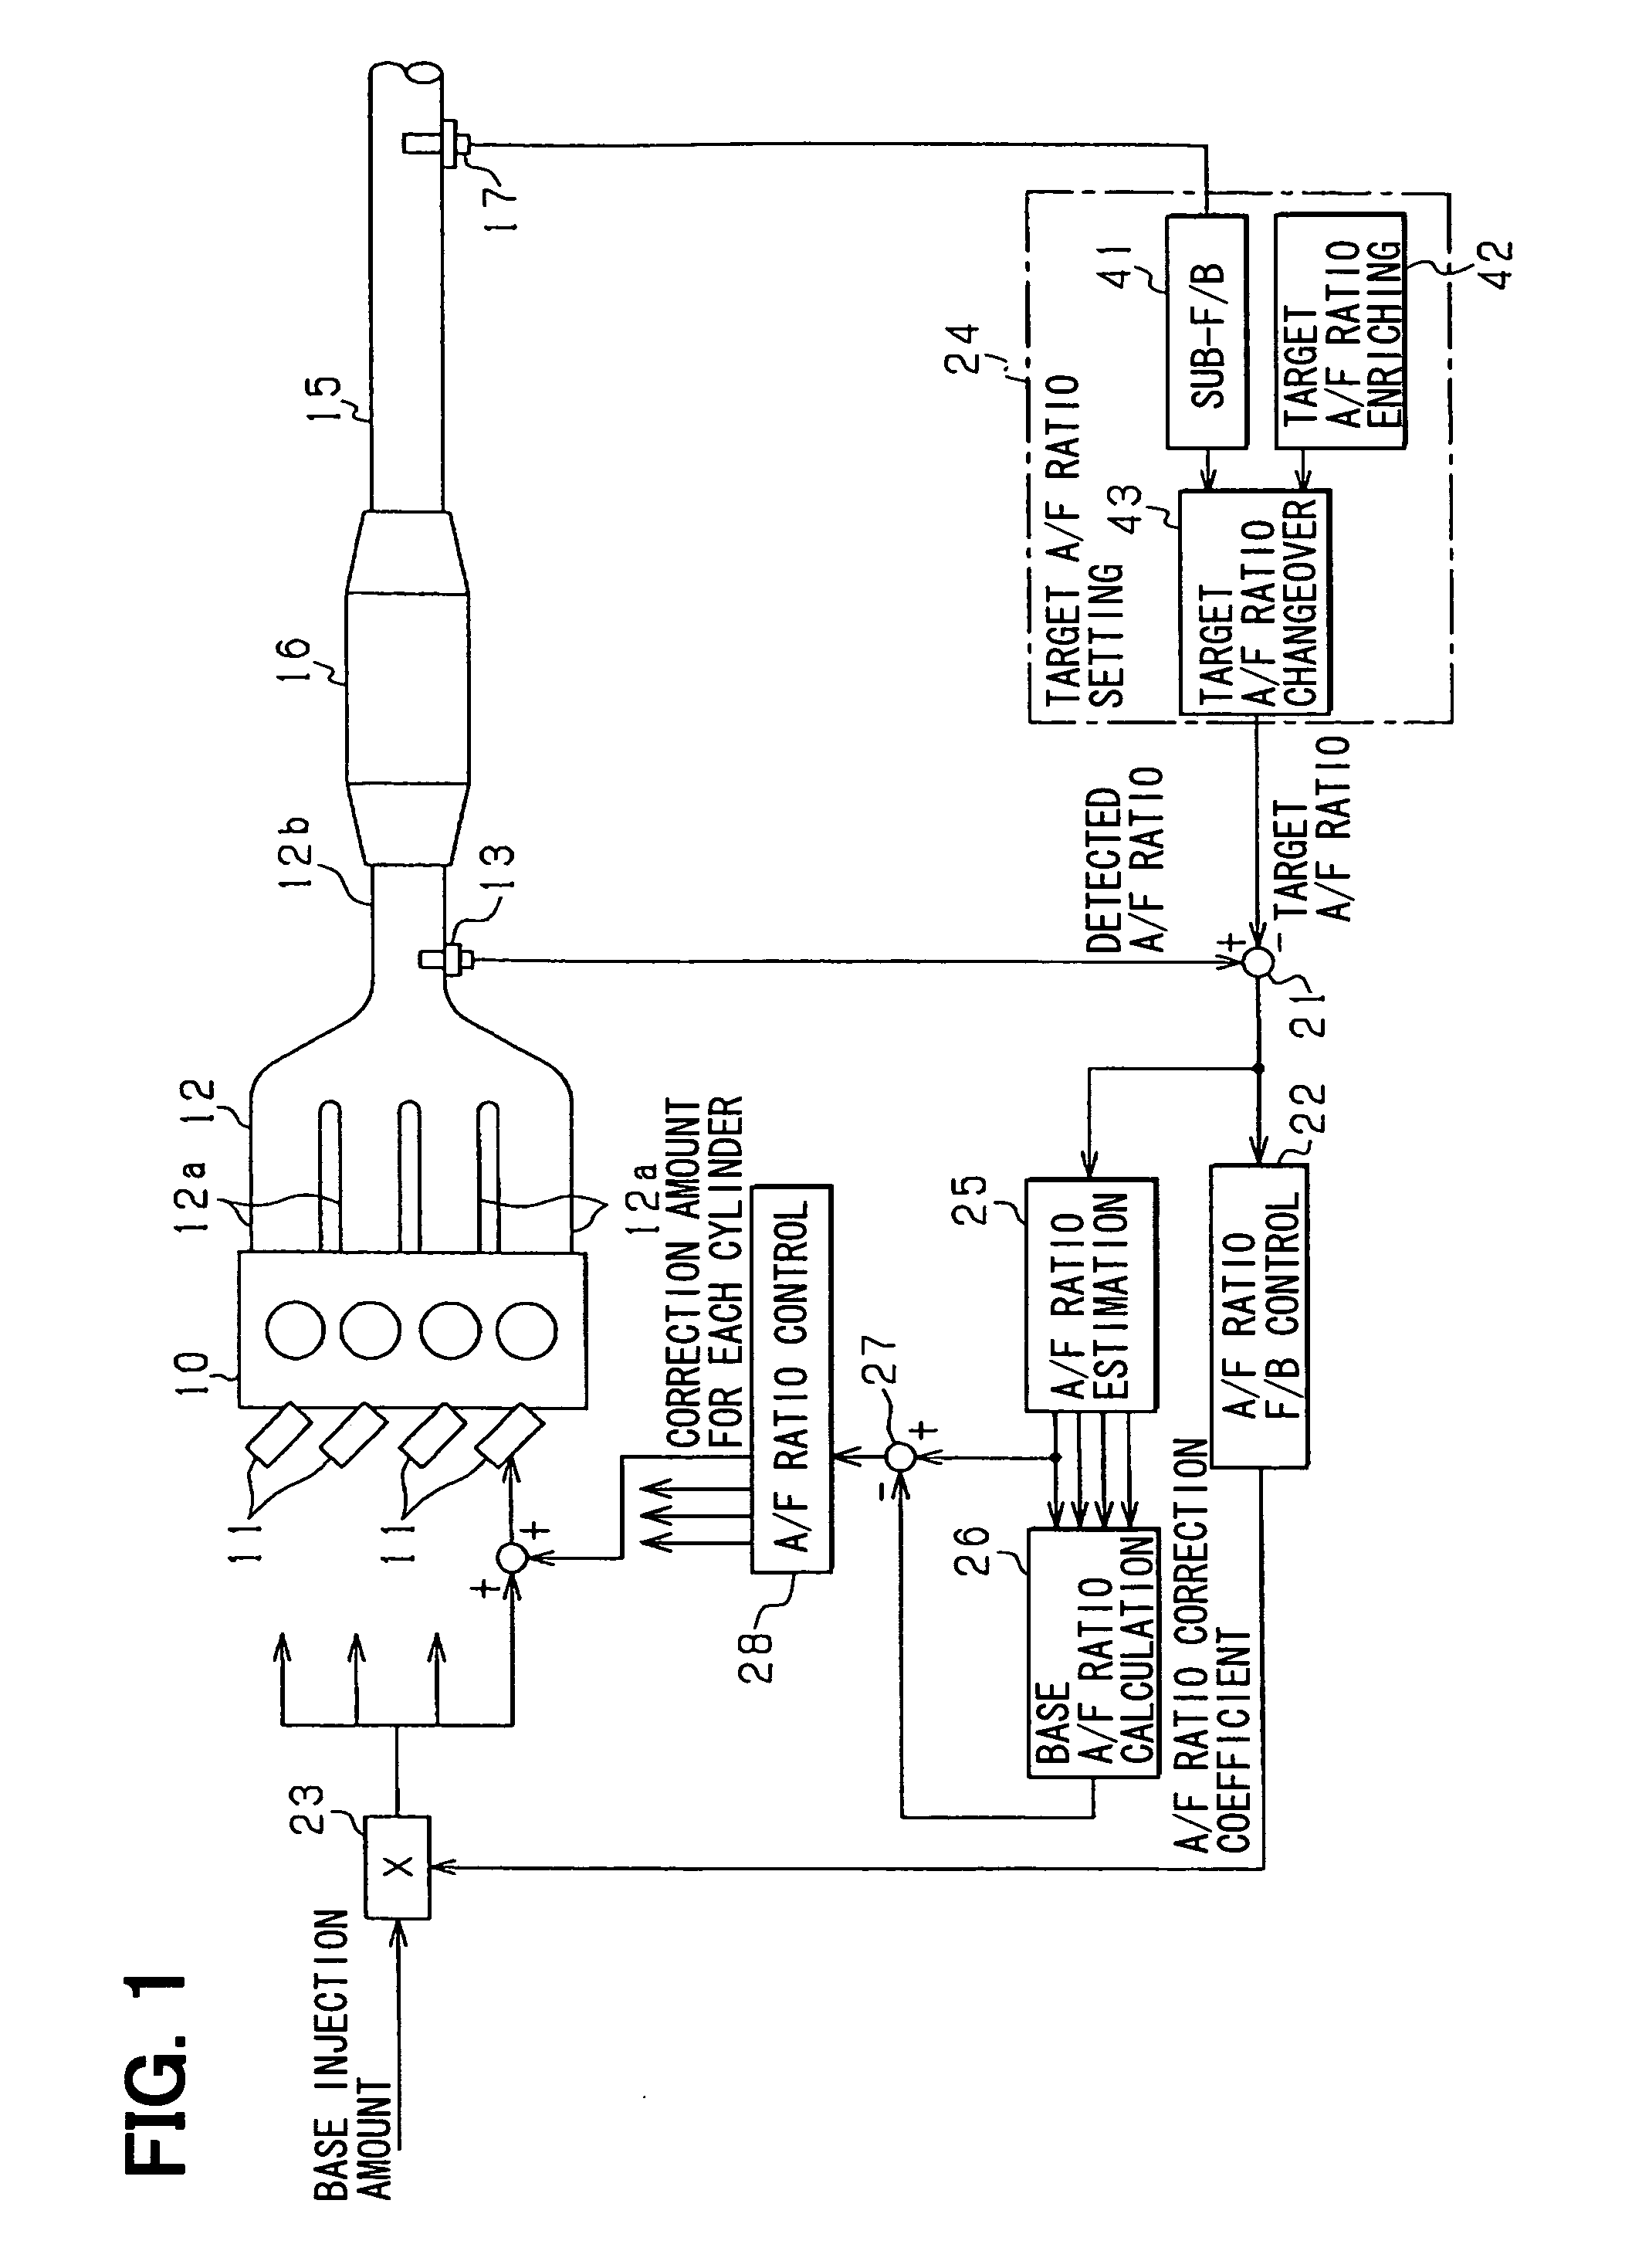 Air-fuel ratio controller for internal combustion engine